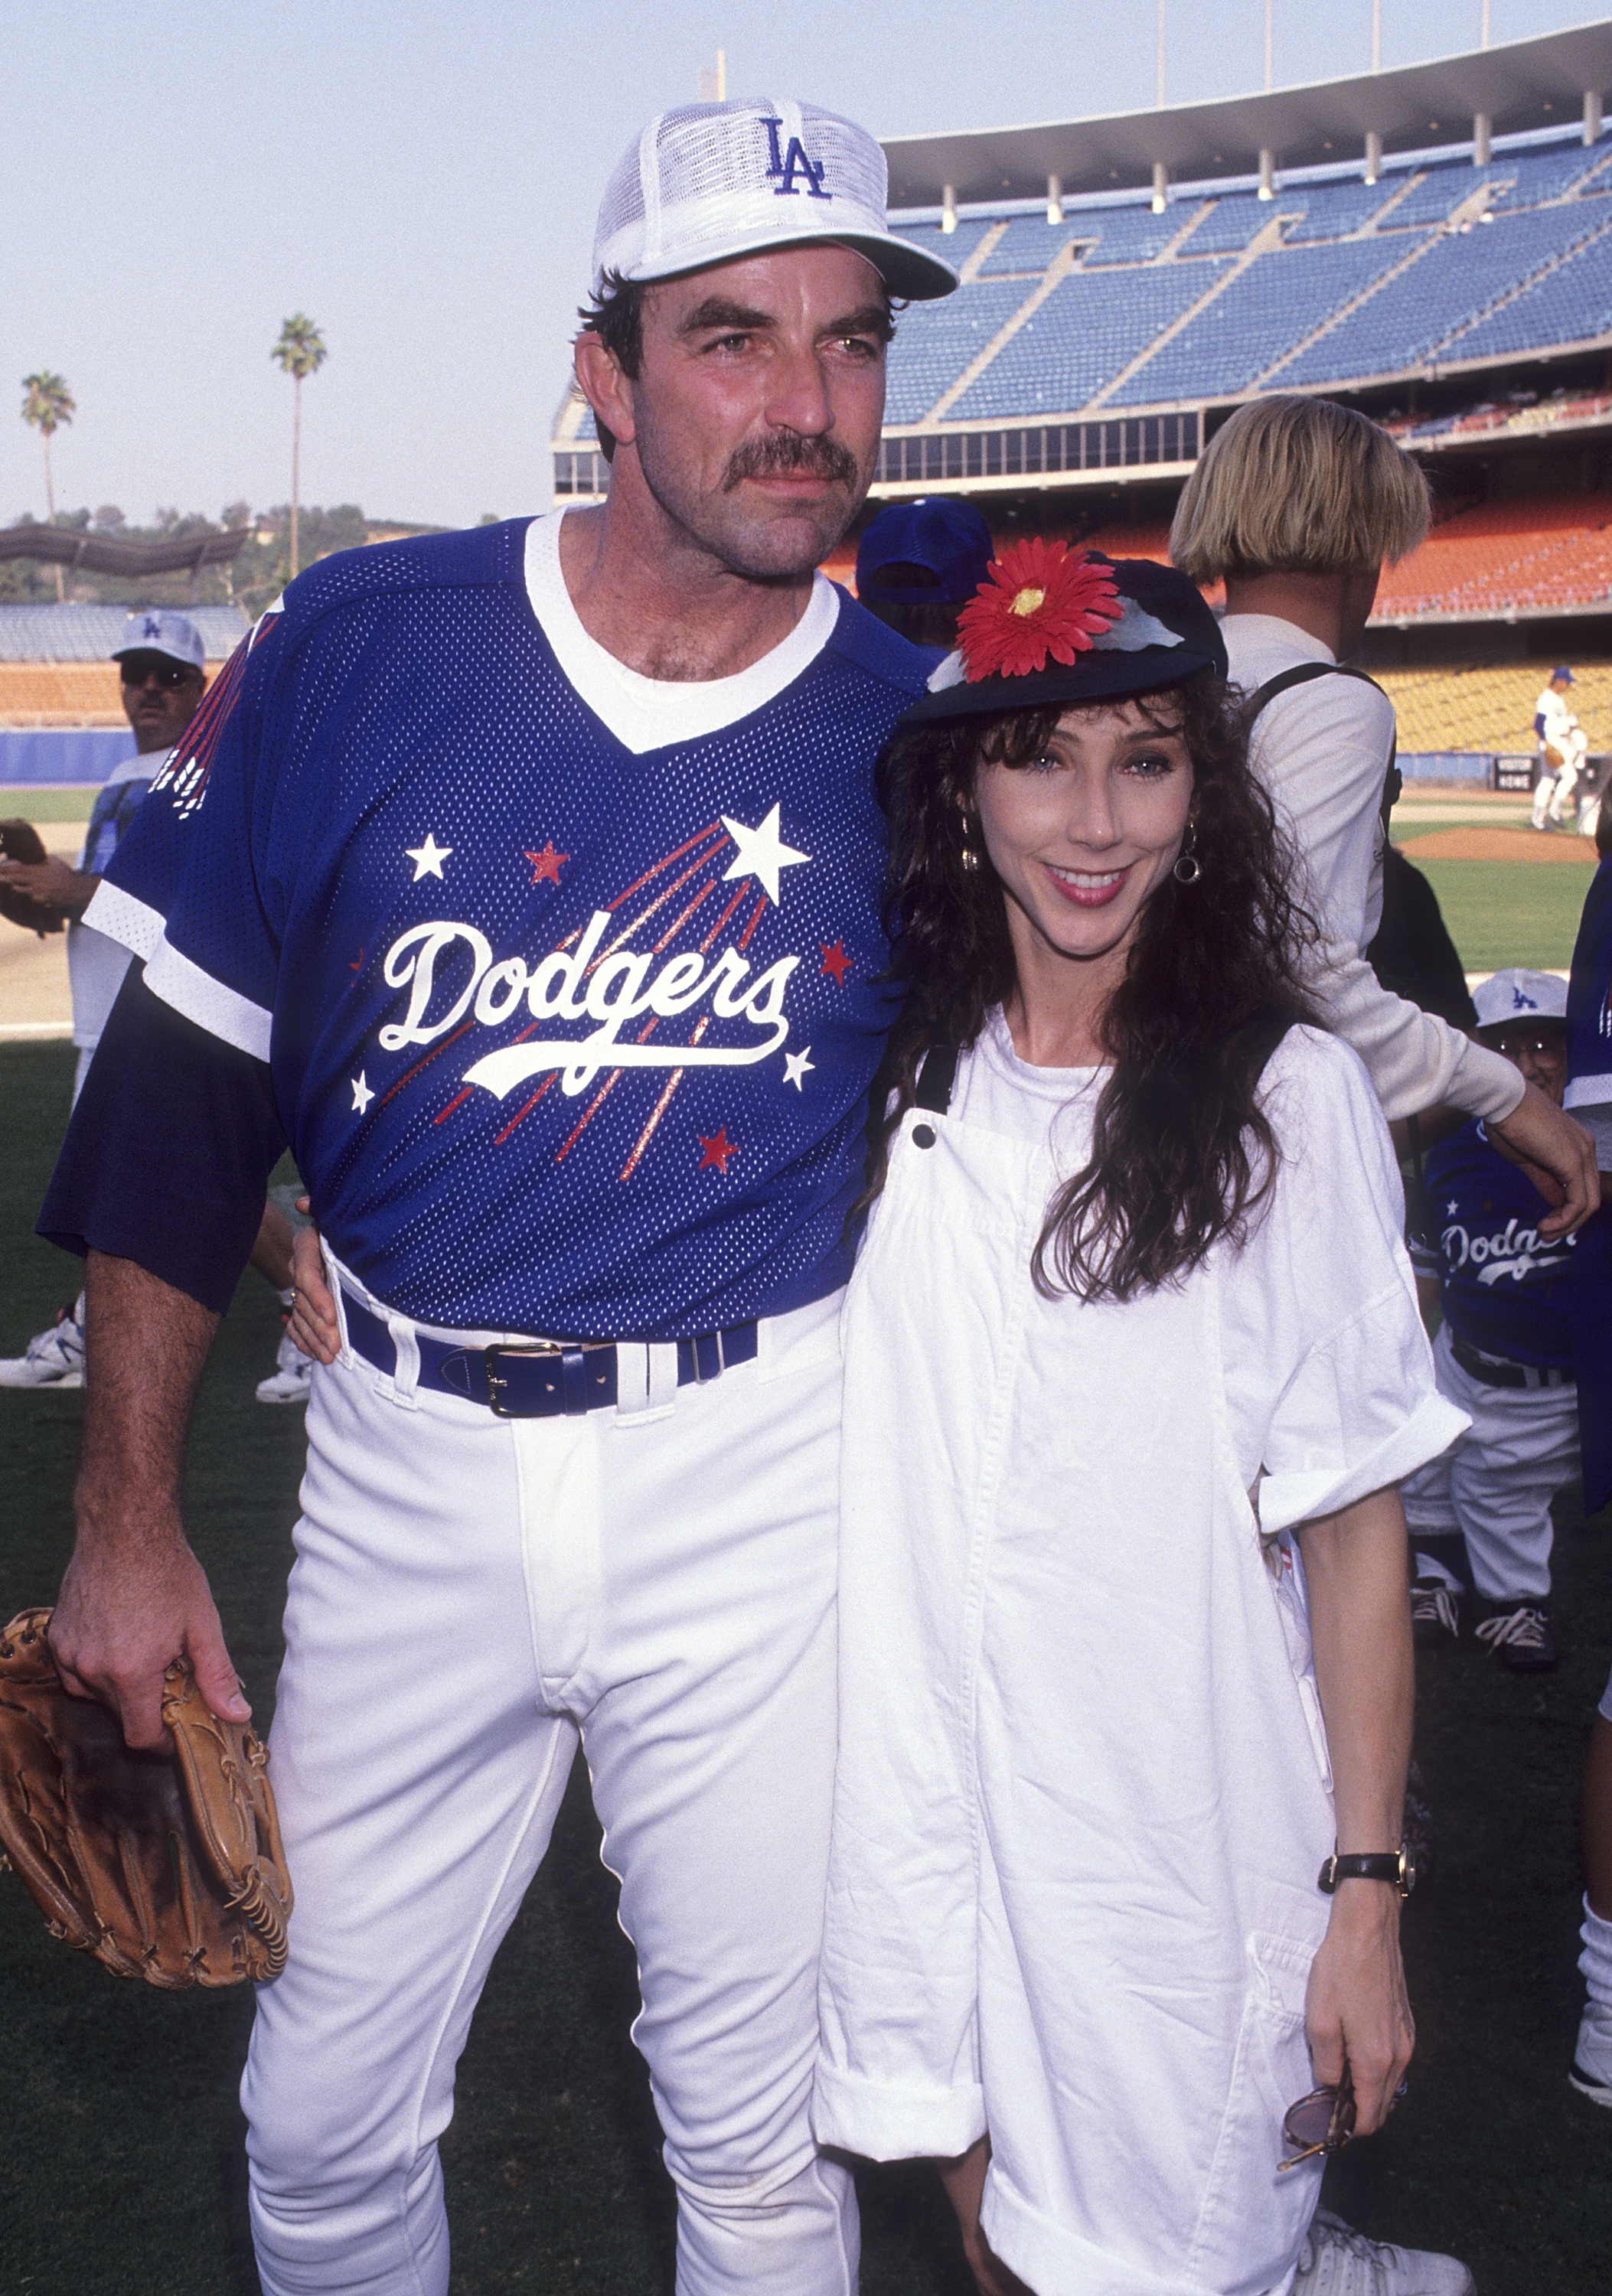 Tom Selleck and Jillie Mack attend the 34th Annual "Hollywood Stars Night" Celebrity Baseball Game at Dodger Stadium in Los Angeles, California, on August 17, 1991. | Source: Getty Images